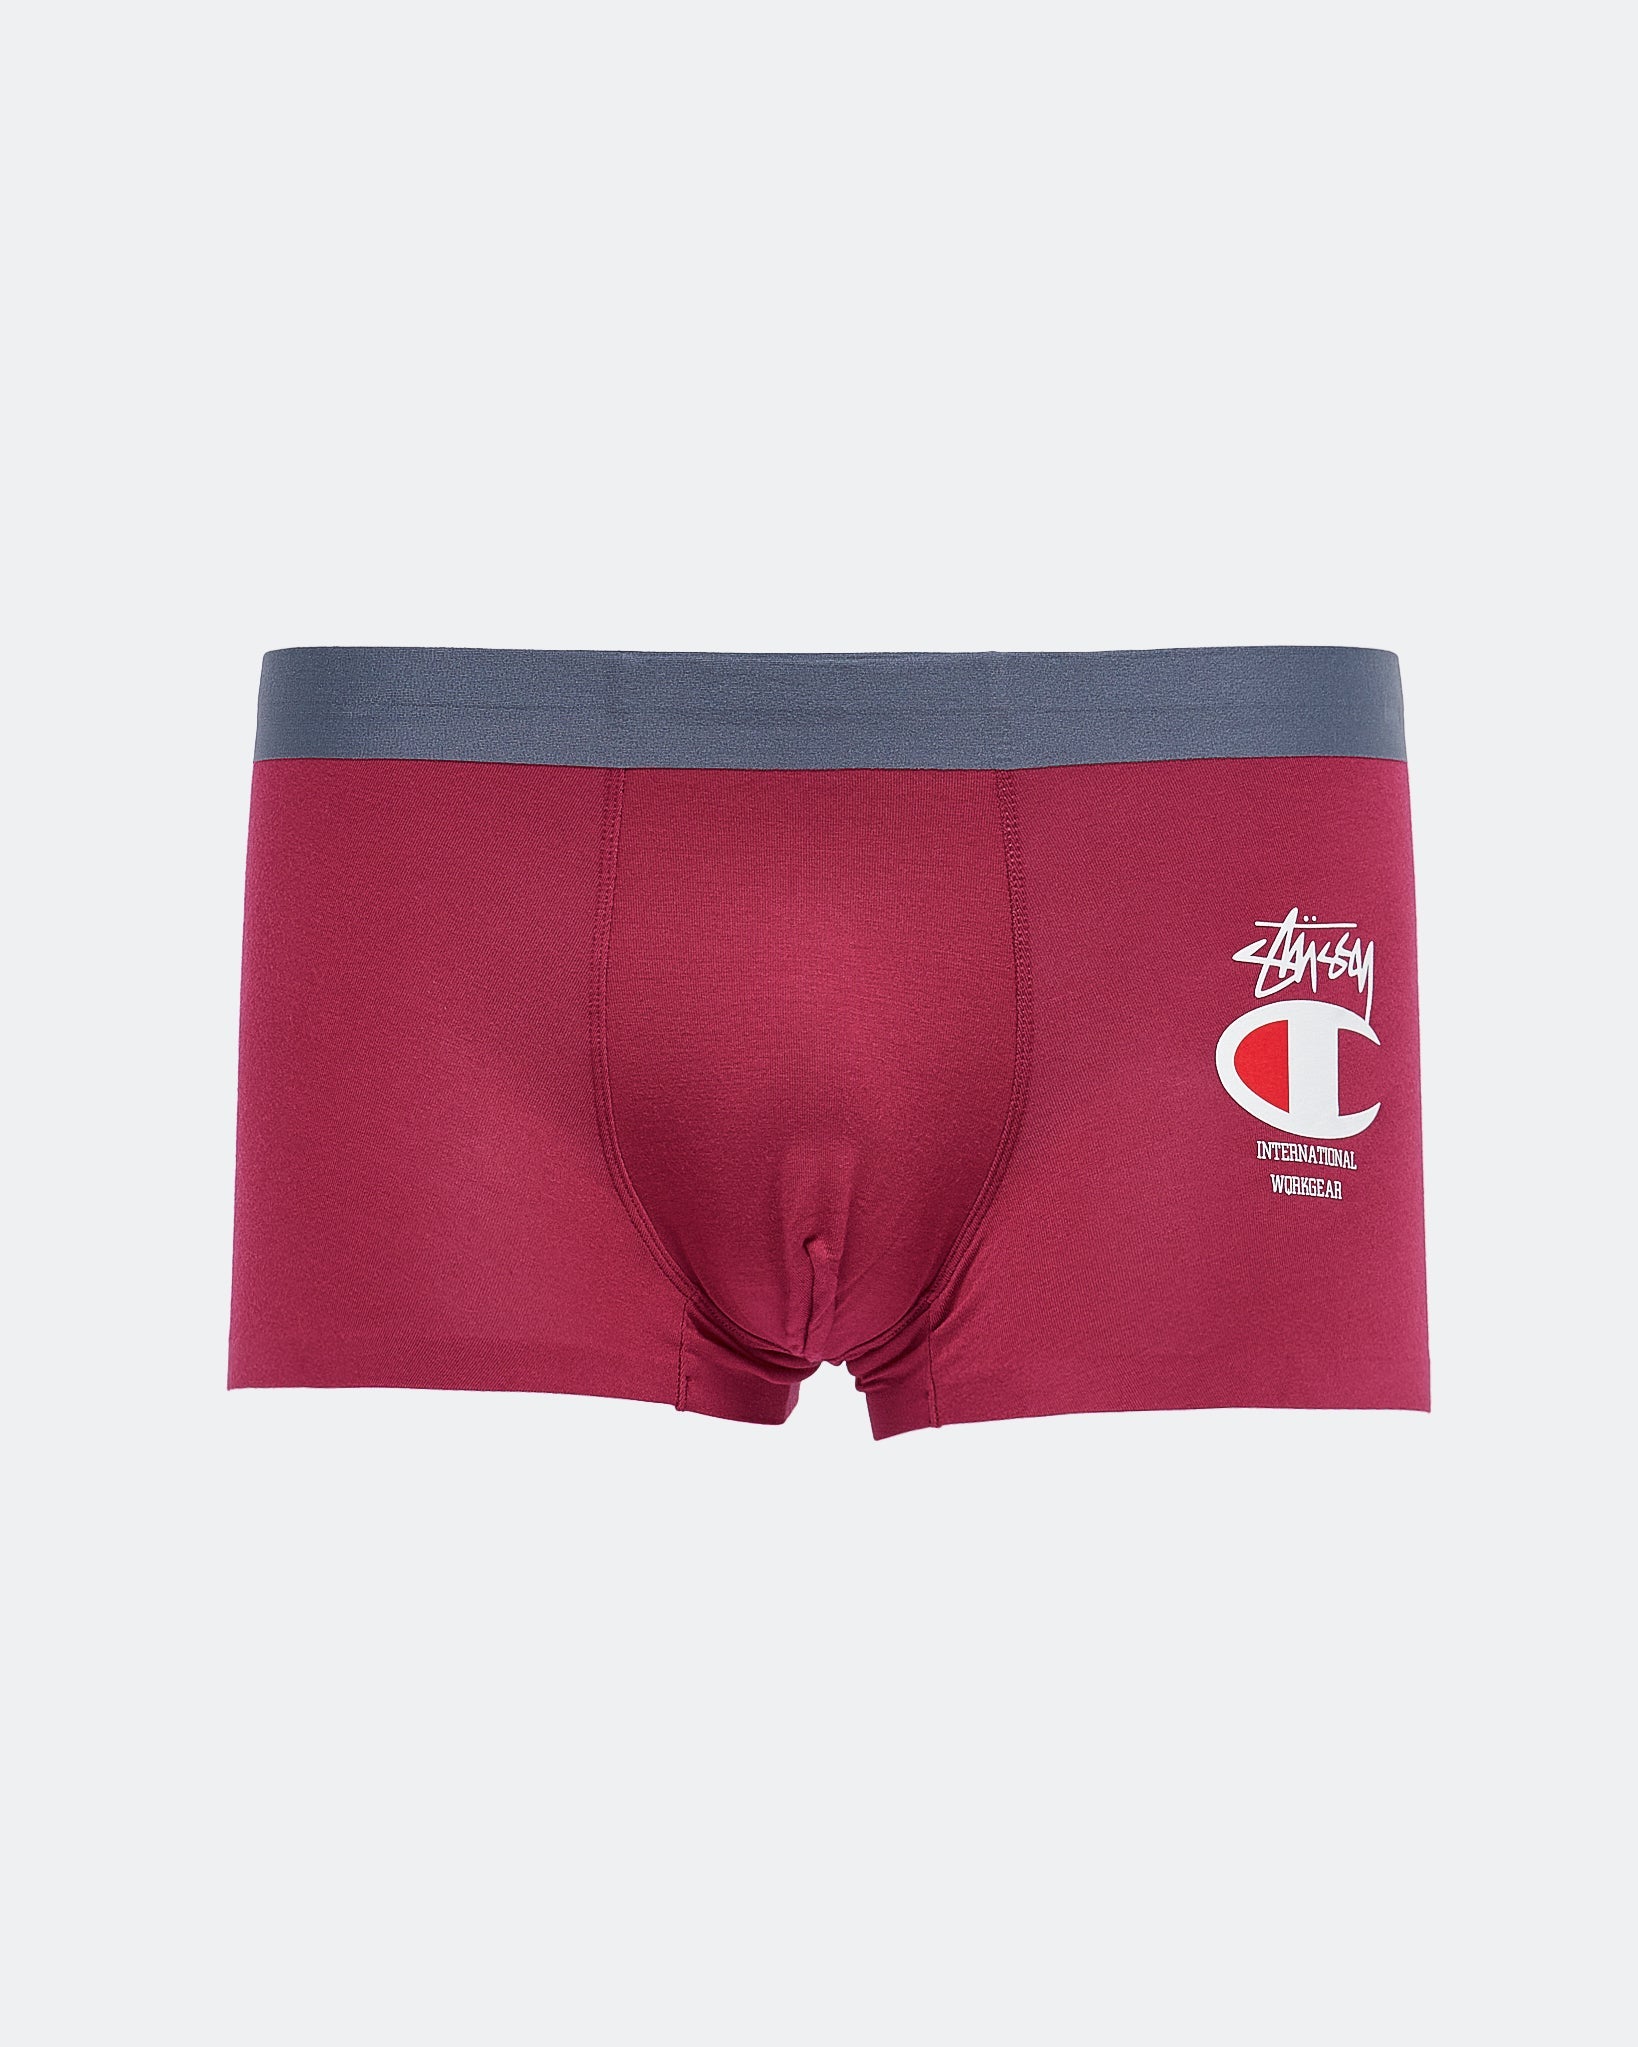 Champion Printed Men Underwear 5.90 - MOI OUTFIT